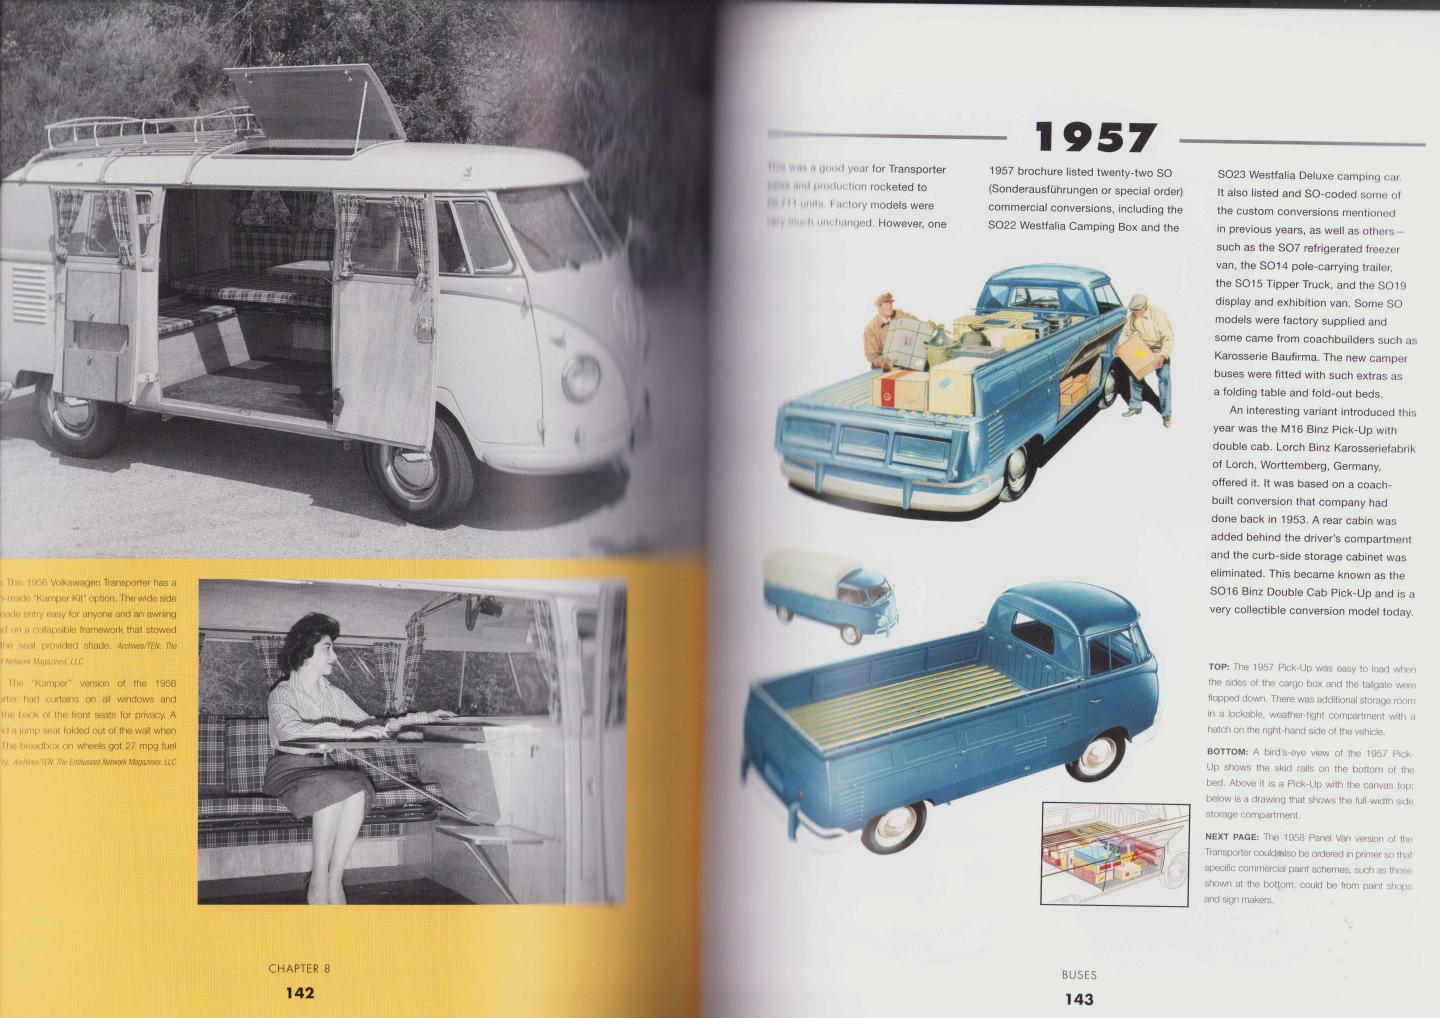 John Gunnell - The Complete book of Classic Volkswagens Beetles, Microbuses, Things, Karmann Ghias, and more